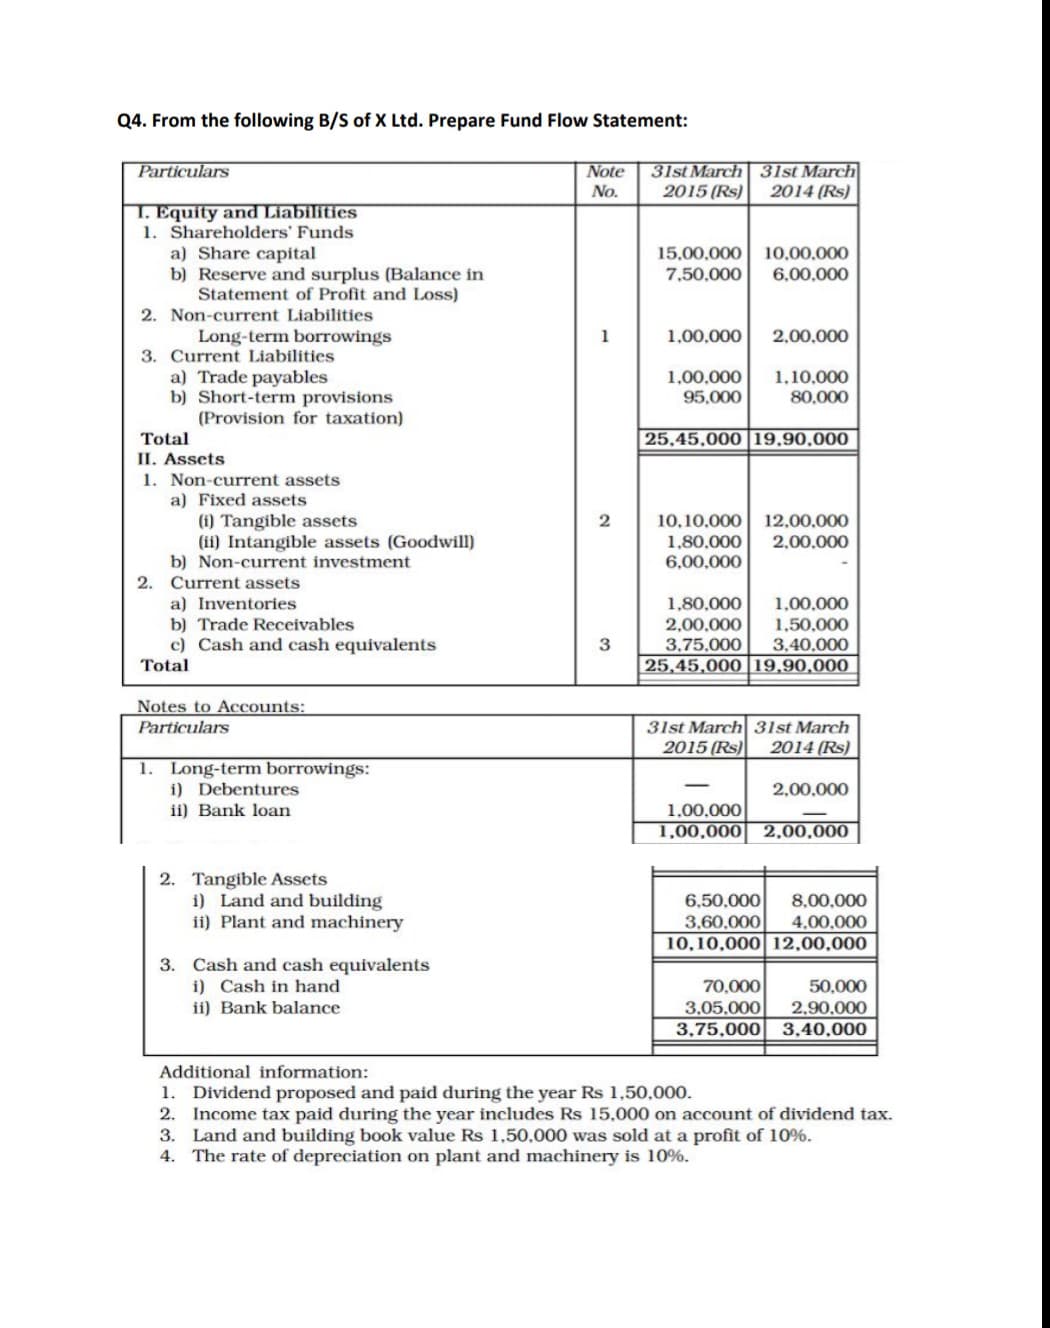 Q4. From the following B/S of X Ltd. Prepare Fund Flow Statement:
31st March 31st March
2015 (Rs)
Particulars
Note
No.
2014 (Rs)
T. Equity and Liabilities
1. Shareholders' Funds
a) Share capital
b) Reserve and surplus (Balance in
Statement of Profit and Loss)
15,00,000 10,00,000
6,00,000
7,50.000
2. Non-current Liabilities
Long-term borrowings
1,00.000
2,00,000
3. Current Liabilities
a) Trade payables
b) Short-term provisions
(Provision for taxation)
1,00.000
95,000
1,10,000
80,000
Total
25,45,000 |19,90,000
II. Assets
1. Non-current assets
a) Fixed assets
(i) Tangible assets
(ii) Intangible assets (Goodwill)
b) Non-current investment
2. Current assets
a) Inventories
b) Trade Receivables
c) Cash and cash equivalents
Total
10,10.000 12,00,000
2,00.000
2
1,80,000
6,00,000
1,80,000
2,00,000
3,75.000
25,45,000|19,90,000 |
1,00,000
1,50.000
3.40,000
Notes to Accounts:
31st March 31st March
2015 (Rs)
Particulars
2014 (Rs)
1. Long-term borrowings:
i) Debentures
ii) Bank loan
2,00,000
1,00.000
1,00,000| 2,00,000
2. Tangible Assets
i) Land and building
ii) Plant and machinery
8,00,000
4,00,000
10,10,000 12,00,000
6,50.000
3,60,000
3. Cash and cash equivalents
i) Cash in hand
ii) Bank balance
70,000
3,05.000
3,75,000 3,40,000
50,000
2,90.000
Additional information:
1. Dividend proposed and paid during the year Rs 1,50,000.
2. Income tax paid during the year includes Rs 15,000 on account of dividend tax.
3. Land and building book value Rs 1,50,000 was sold at a profit of 10%.
4. The rate of depreciation on plant and machinery is 10%.
